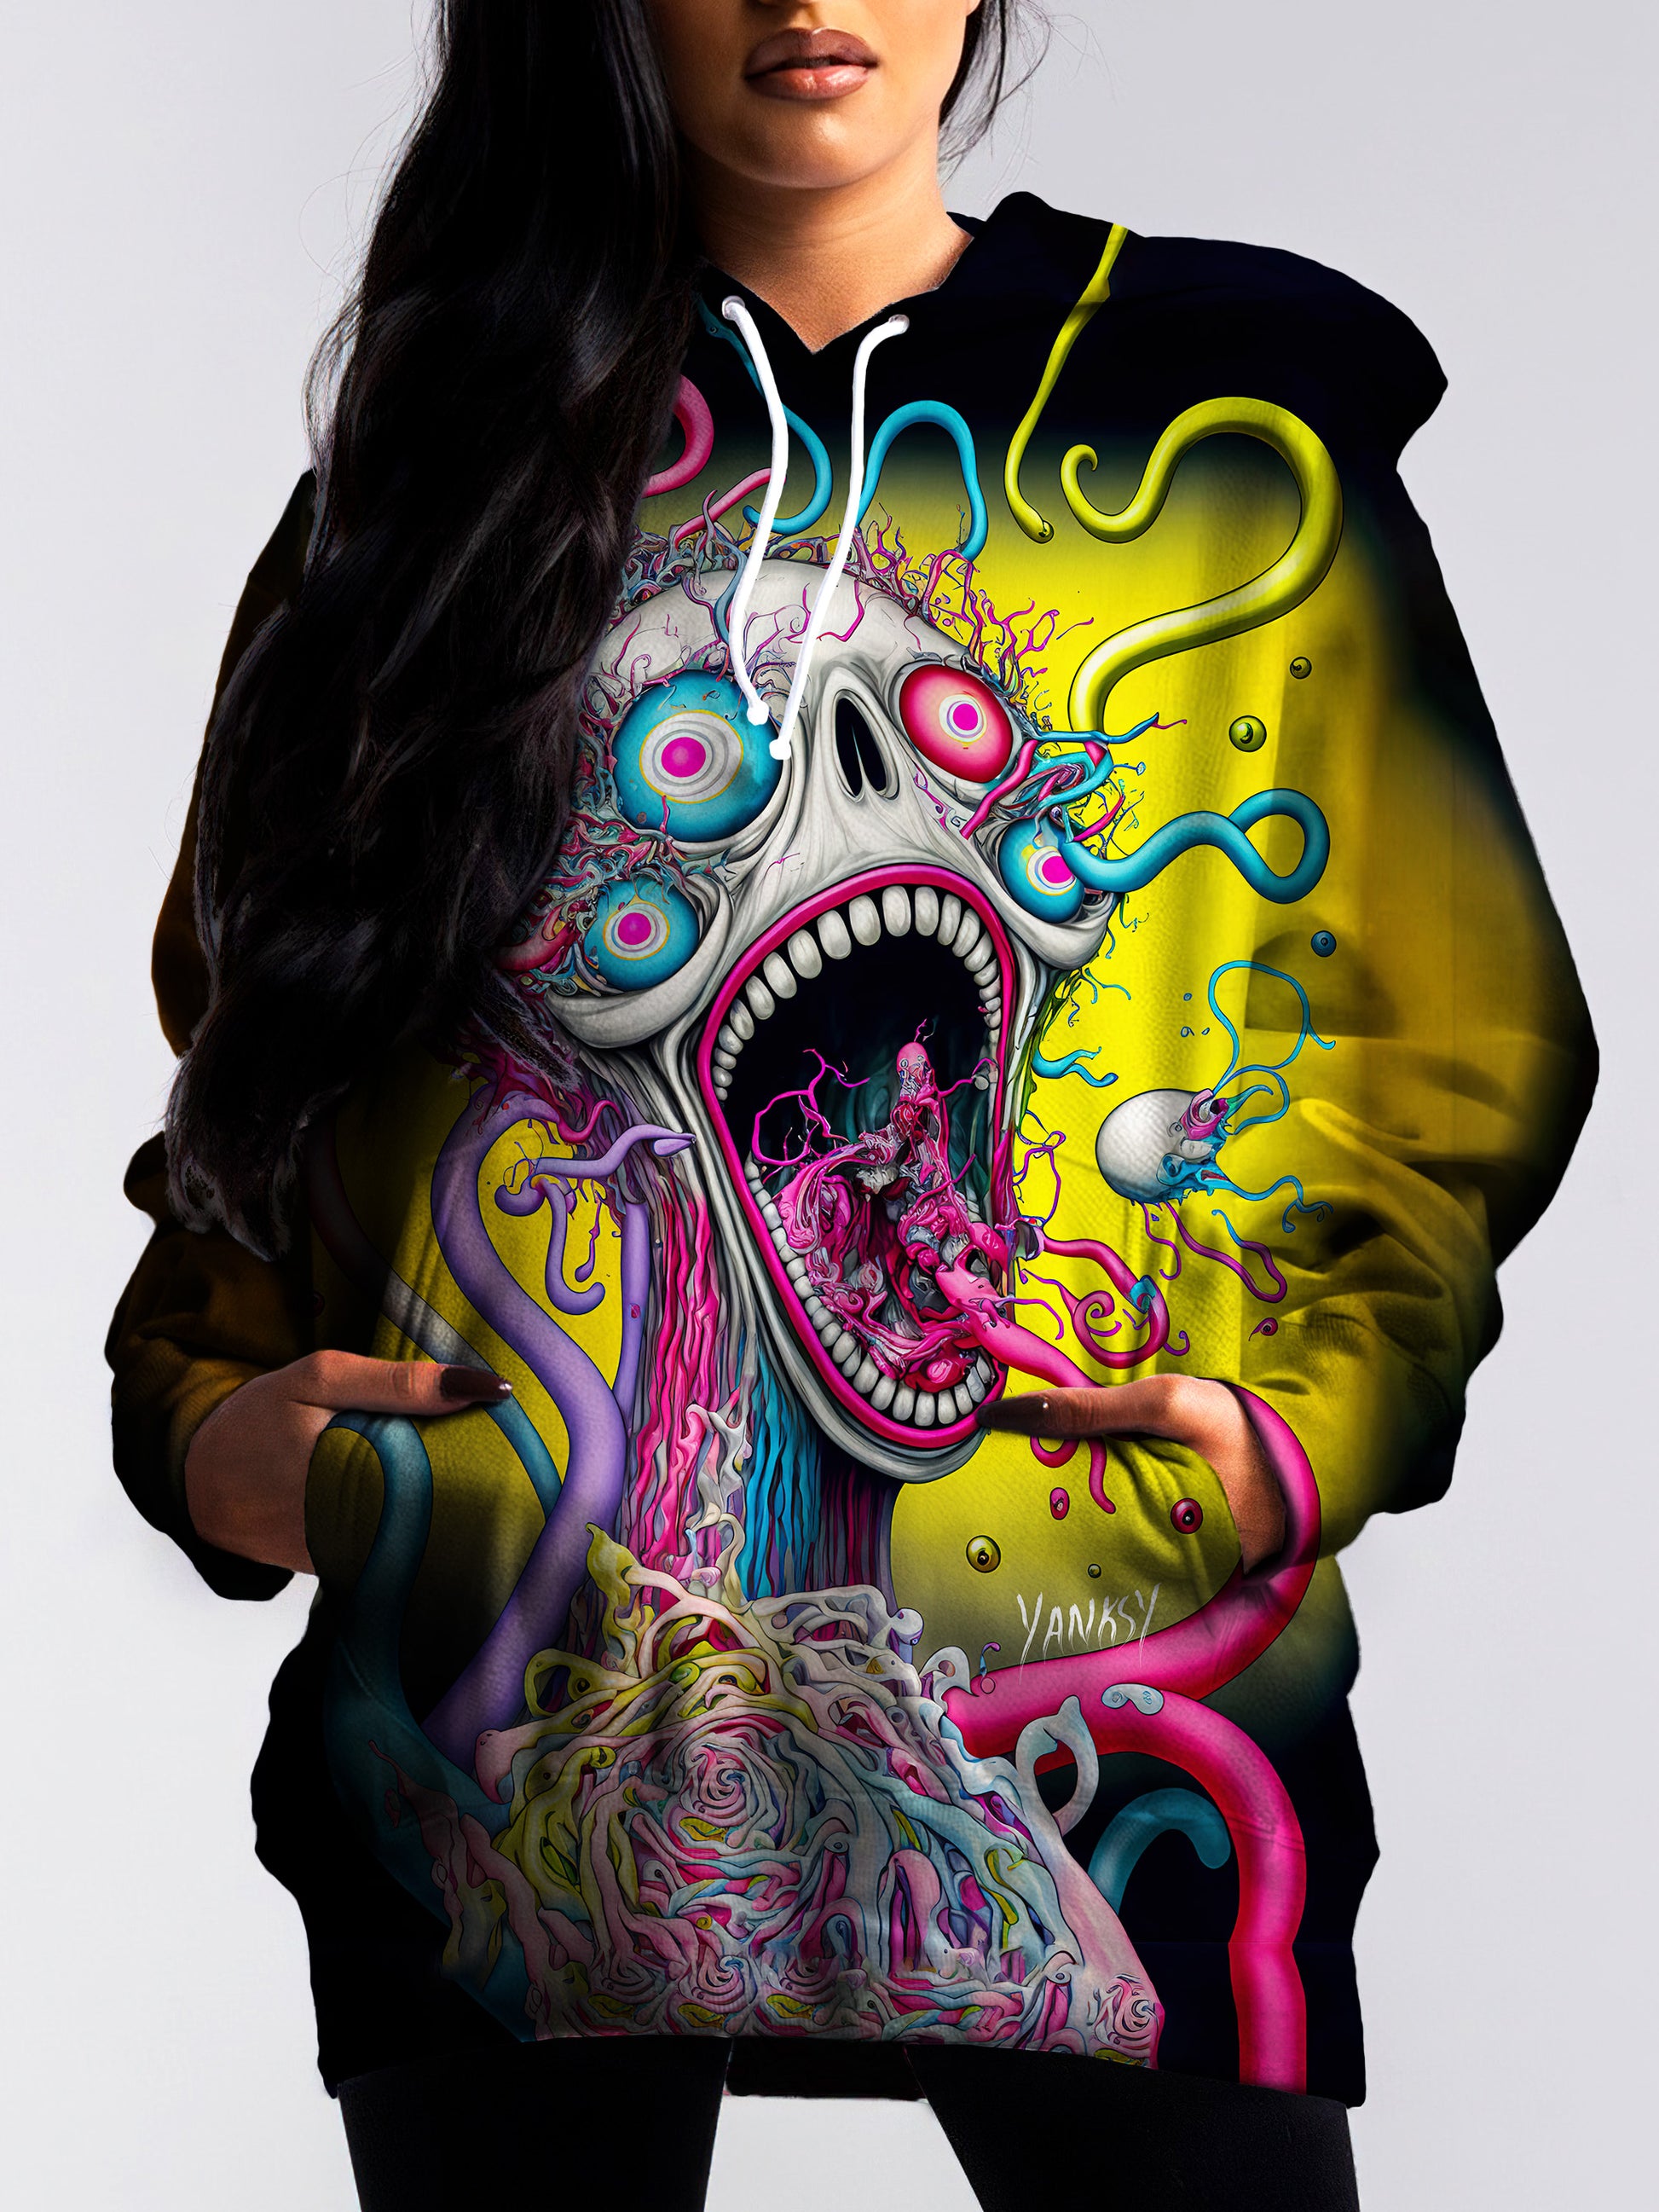 Embrace your inner artist with this one-of-a-kind hoodie